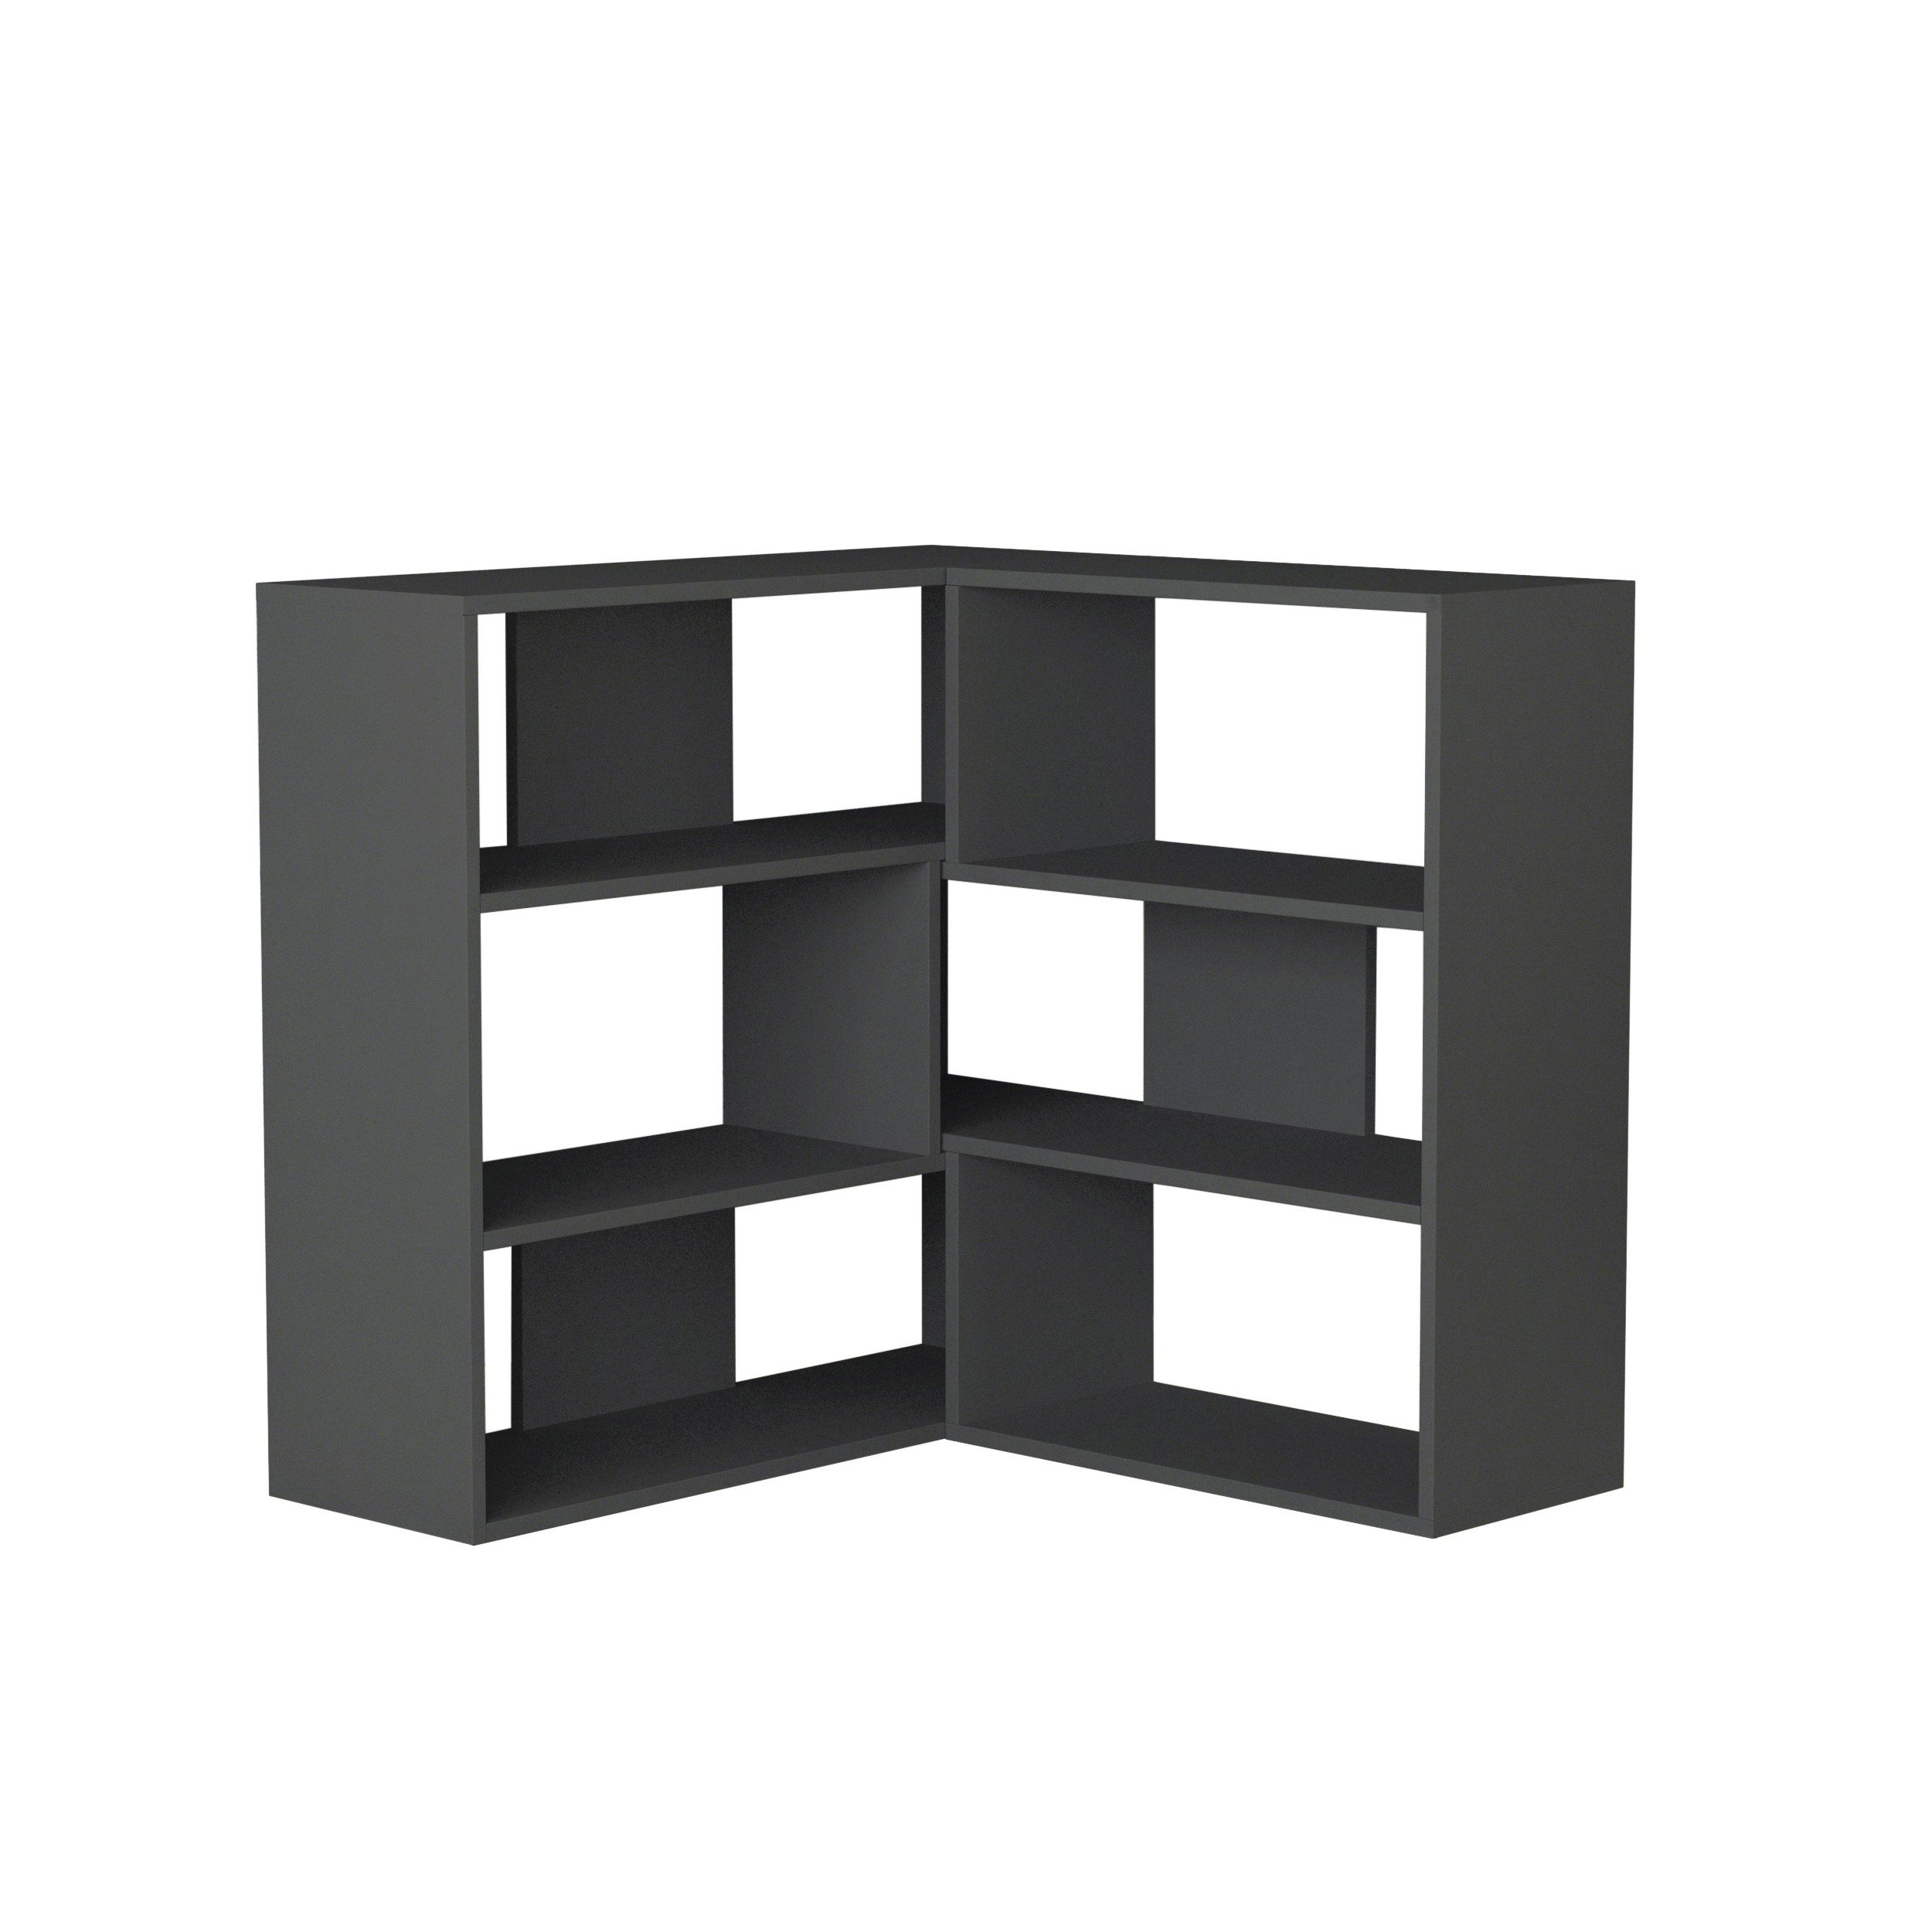 MOLLY BOOKCASE NO.3 - ANTHRACITE - ANTHRACITE - M.KT.02.12715.7